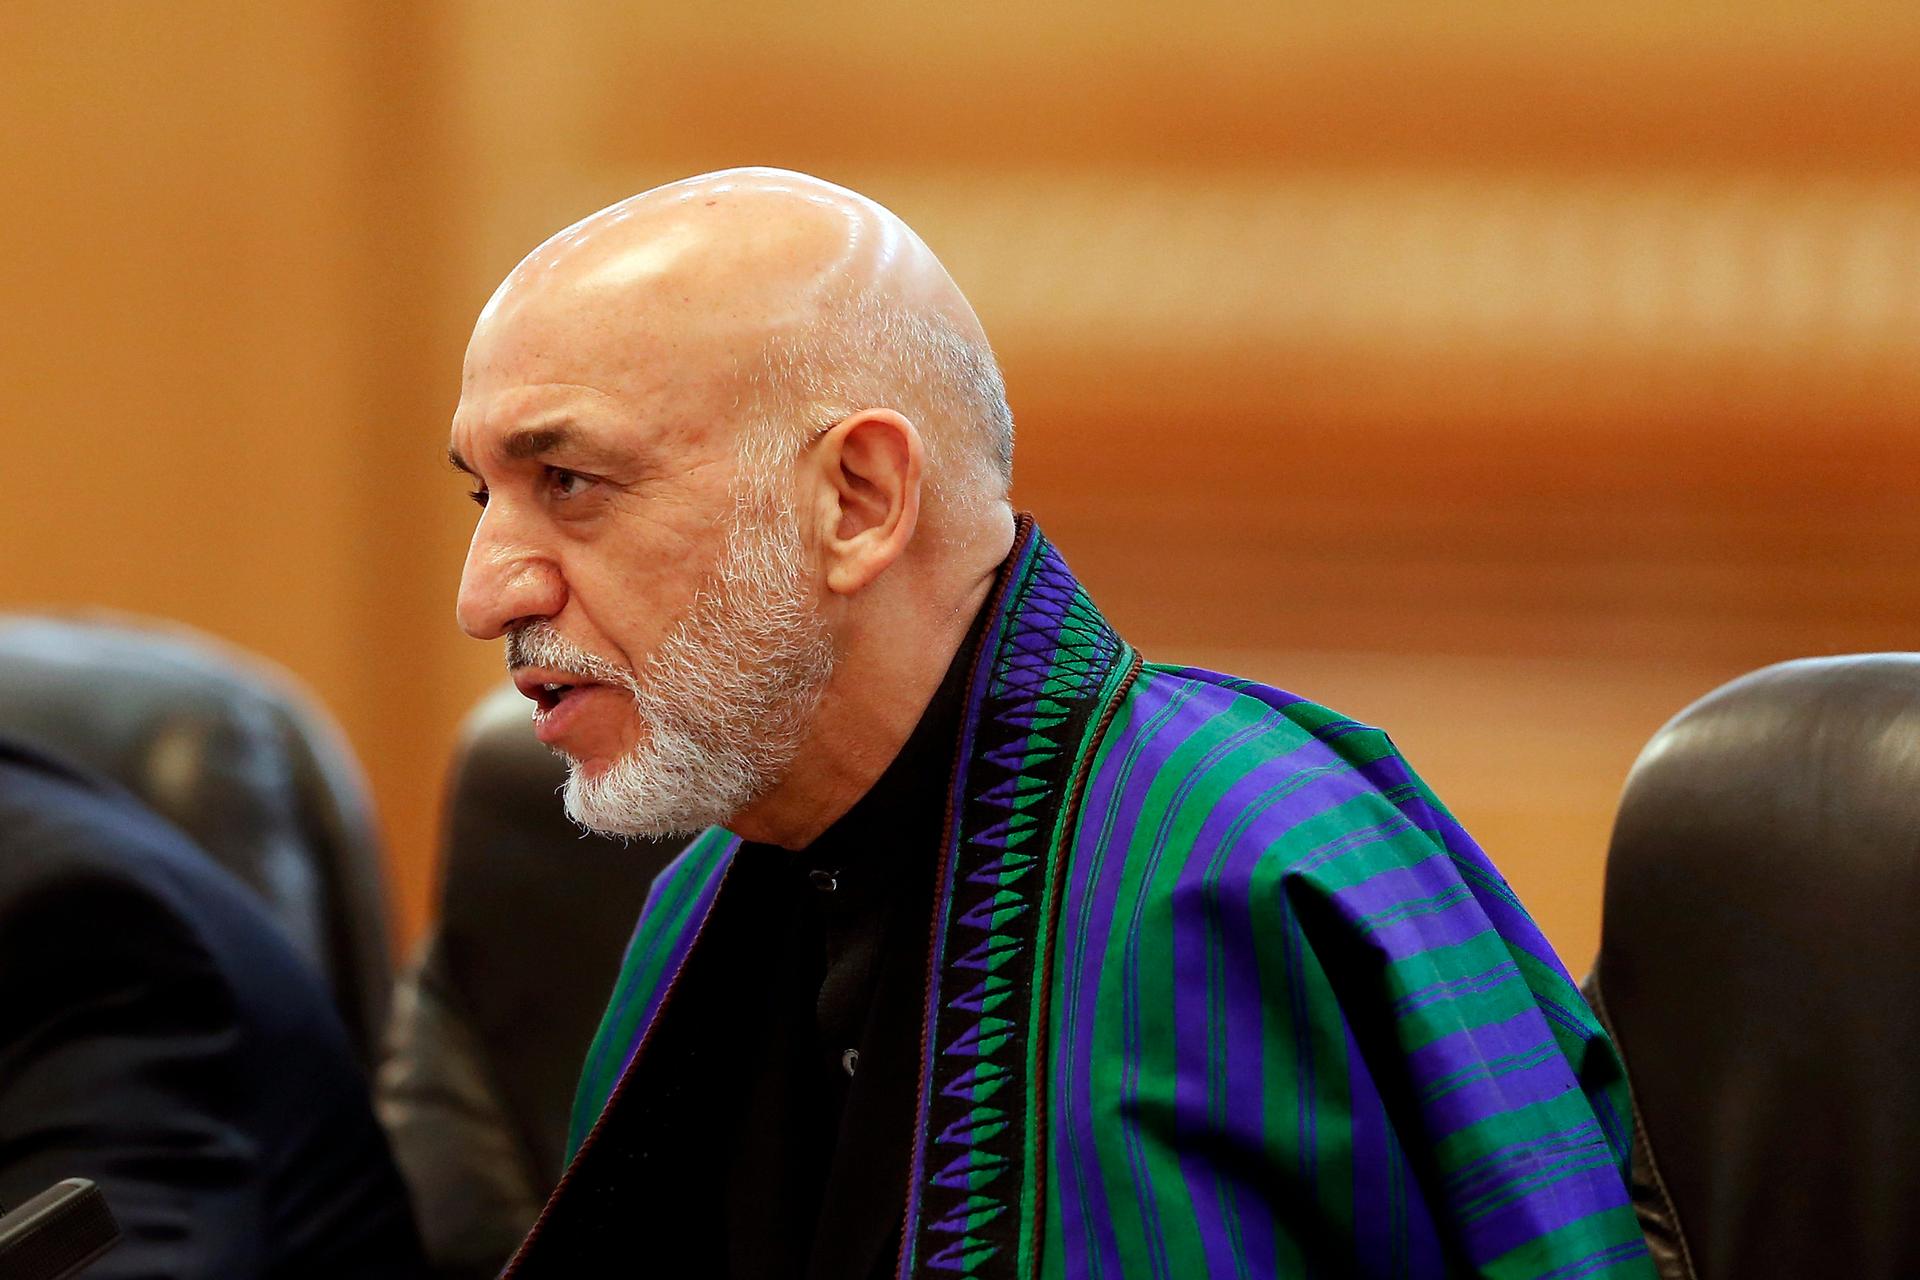 Afghan President Hamid Karzai is slated to step down next April.